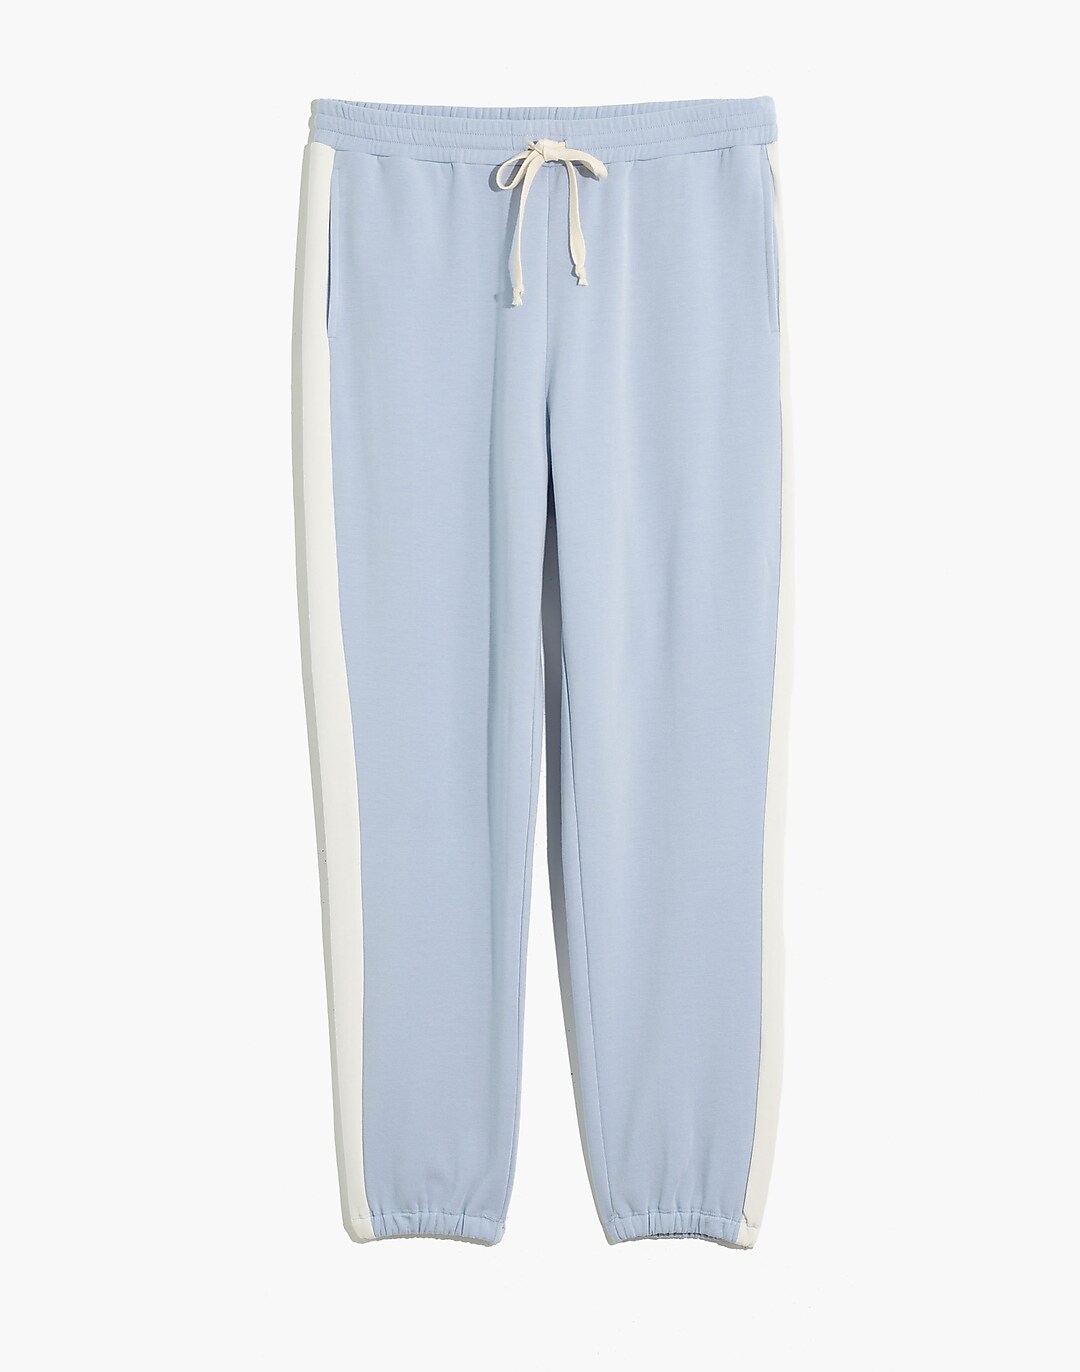 MWL Superbrushed Inset Easygoing Sweatpants